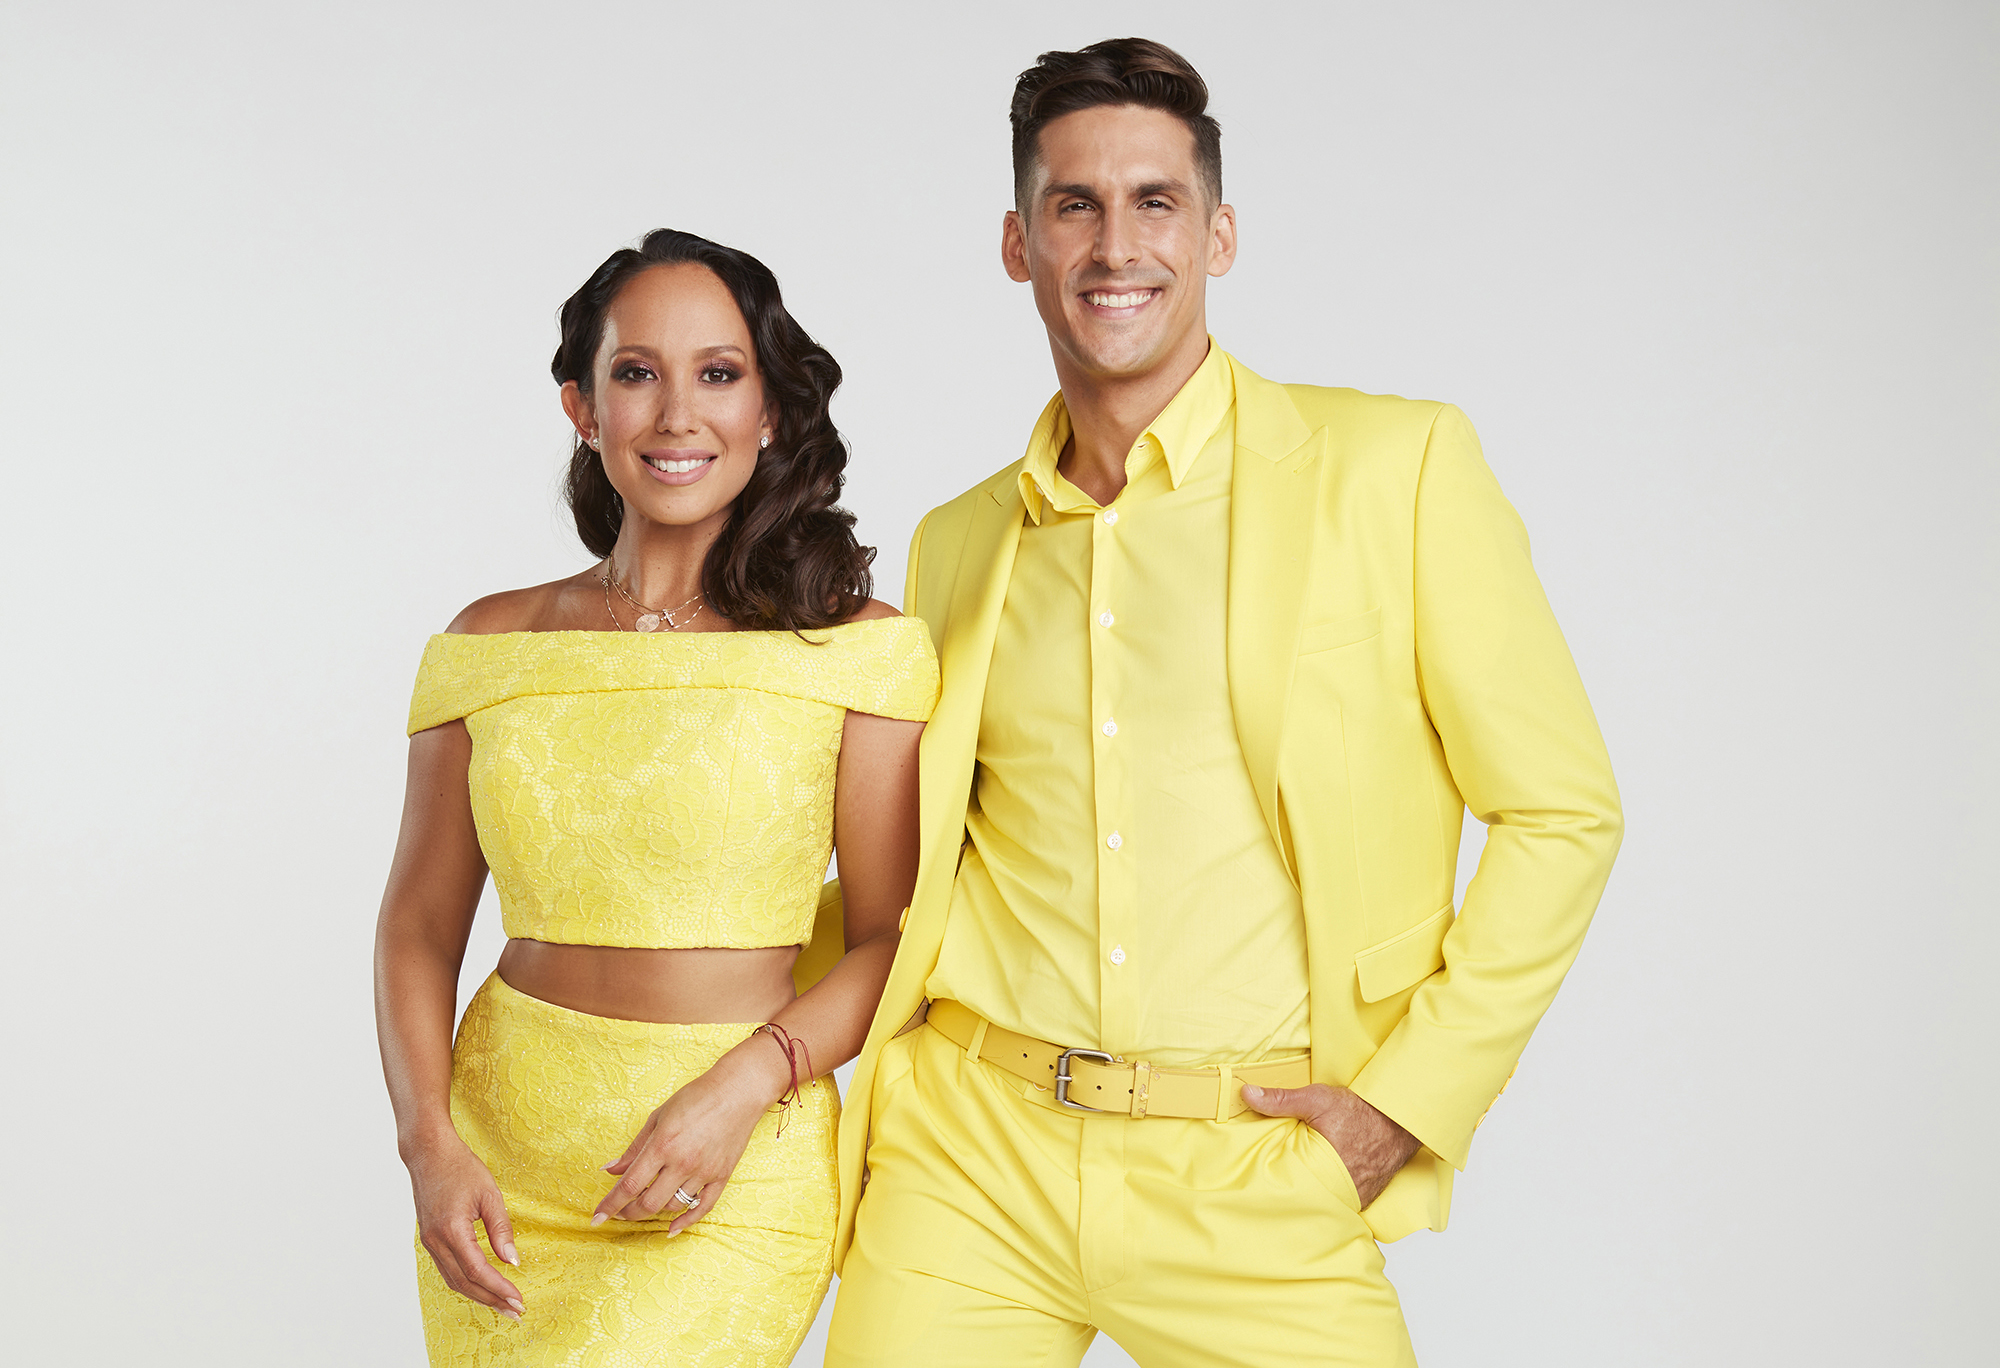 PHOTO: ABC's "Dancing with the Stars" stars Cheryl Burke and Cody Rigsby.